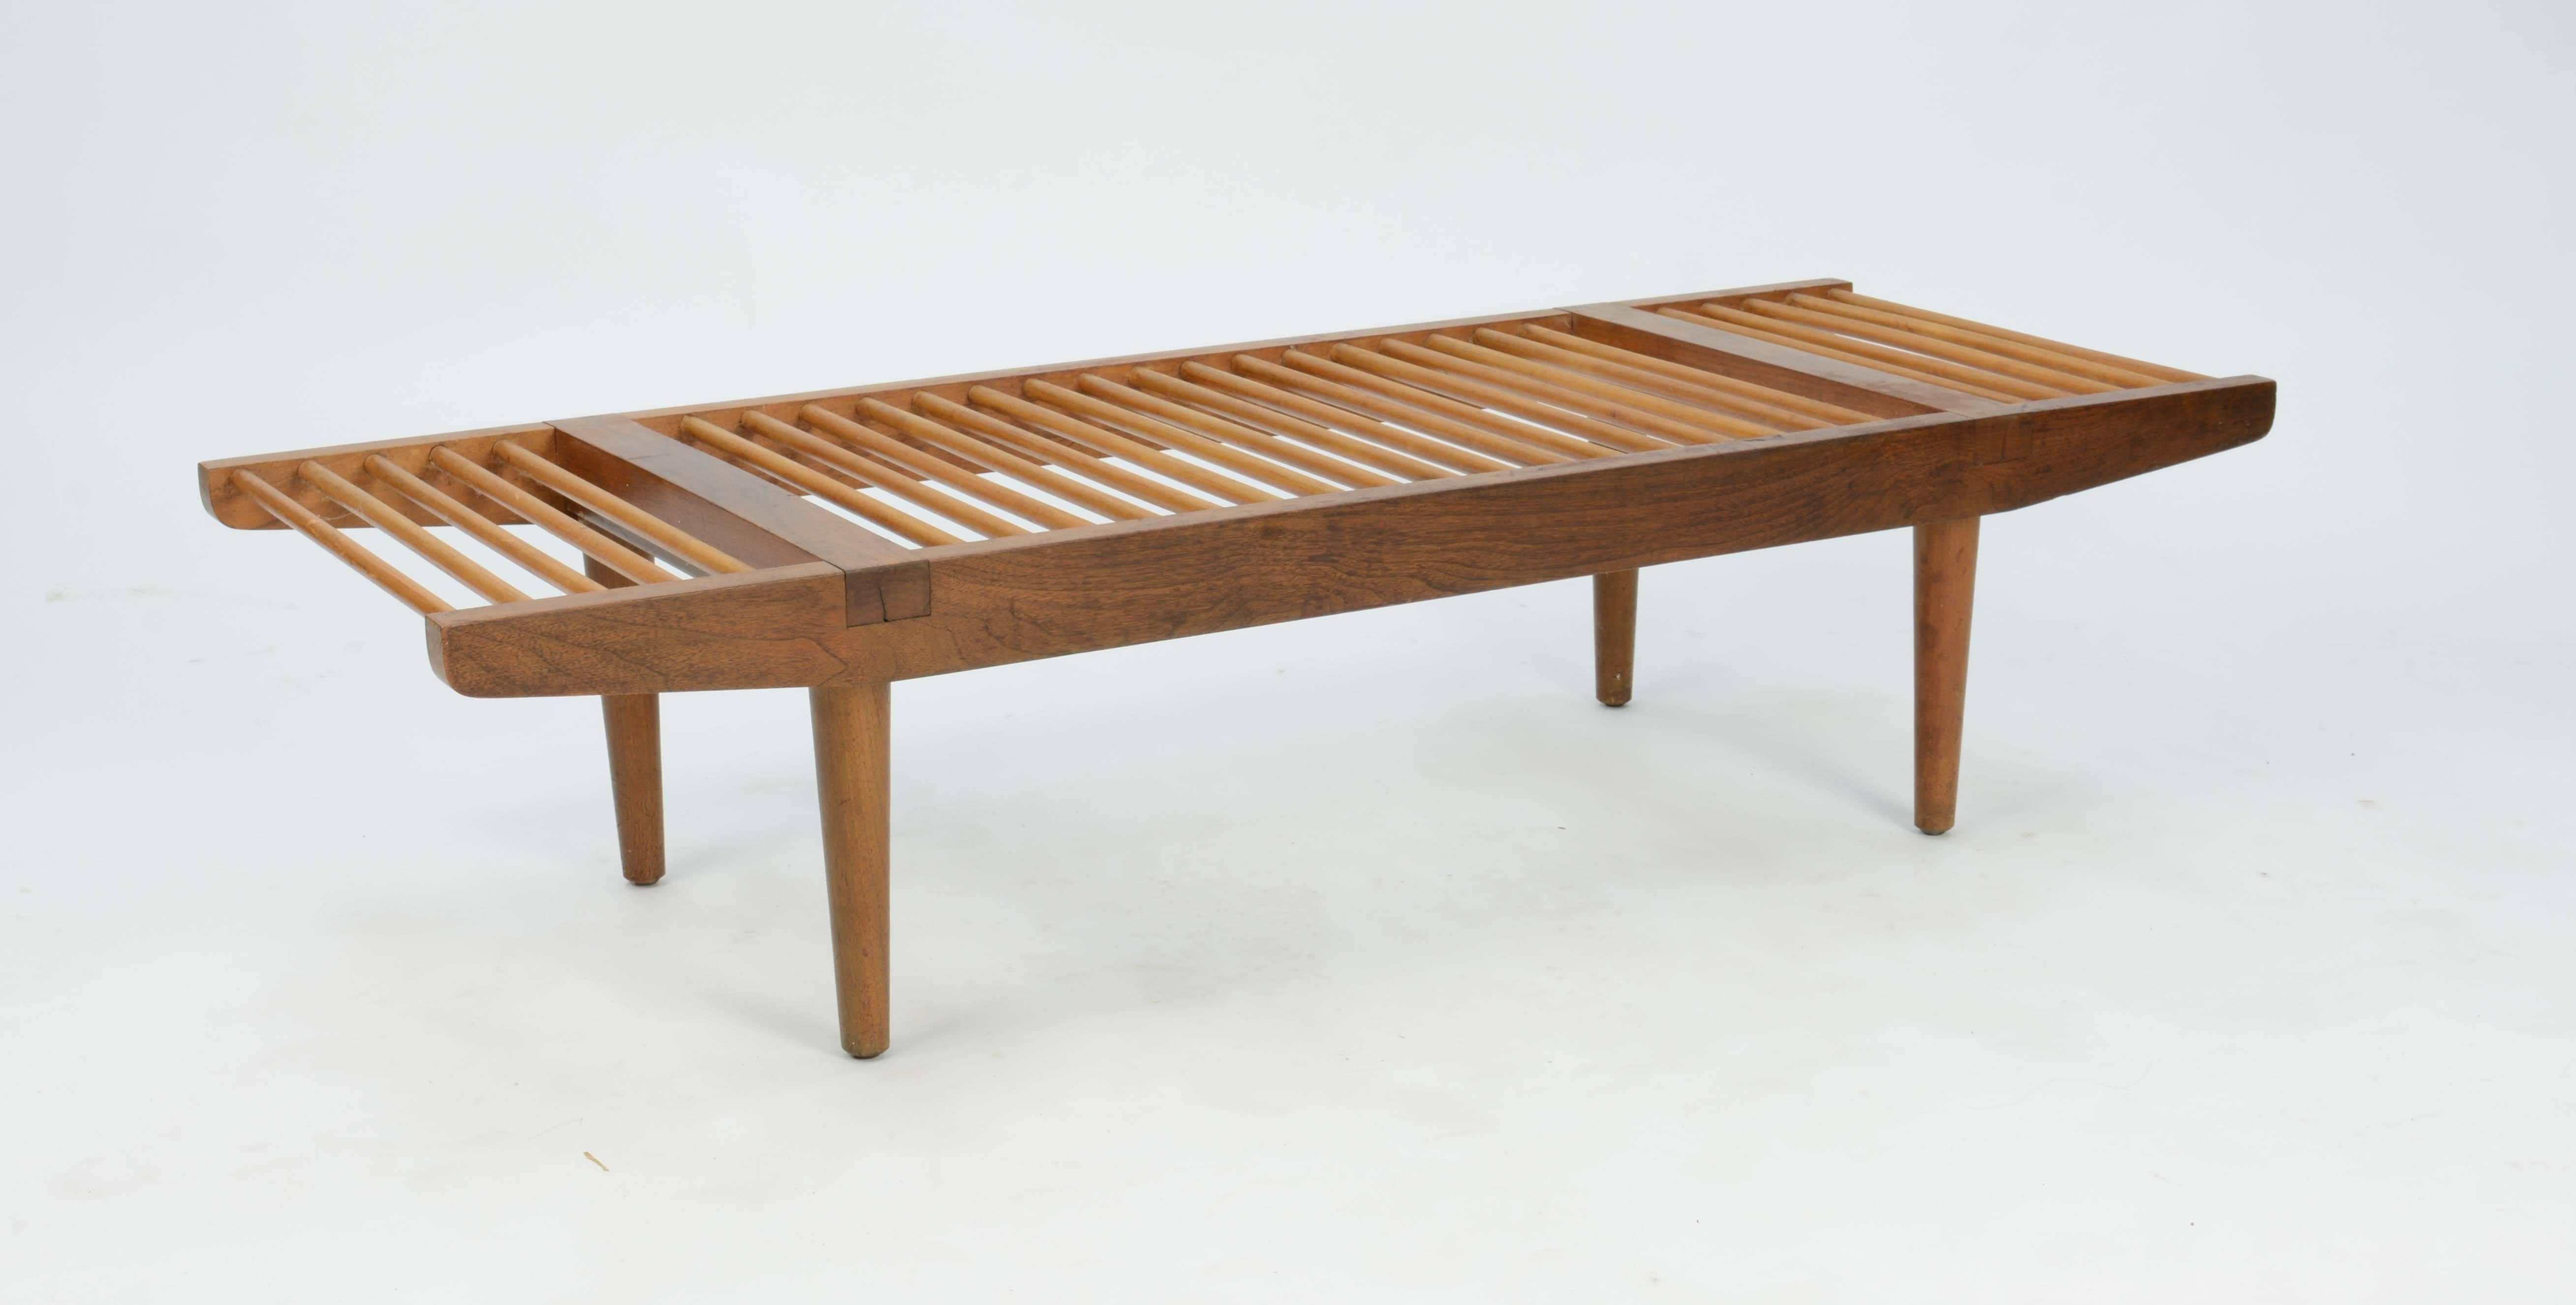 Milo Baughman's for Glenn of California large dowel bench, circa late 1950s. This lovely piece of early California modern that uses walnut and maple for contrasting colors.